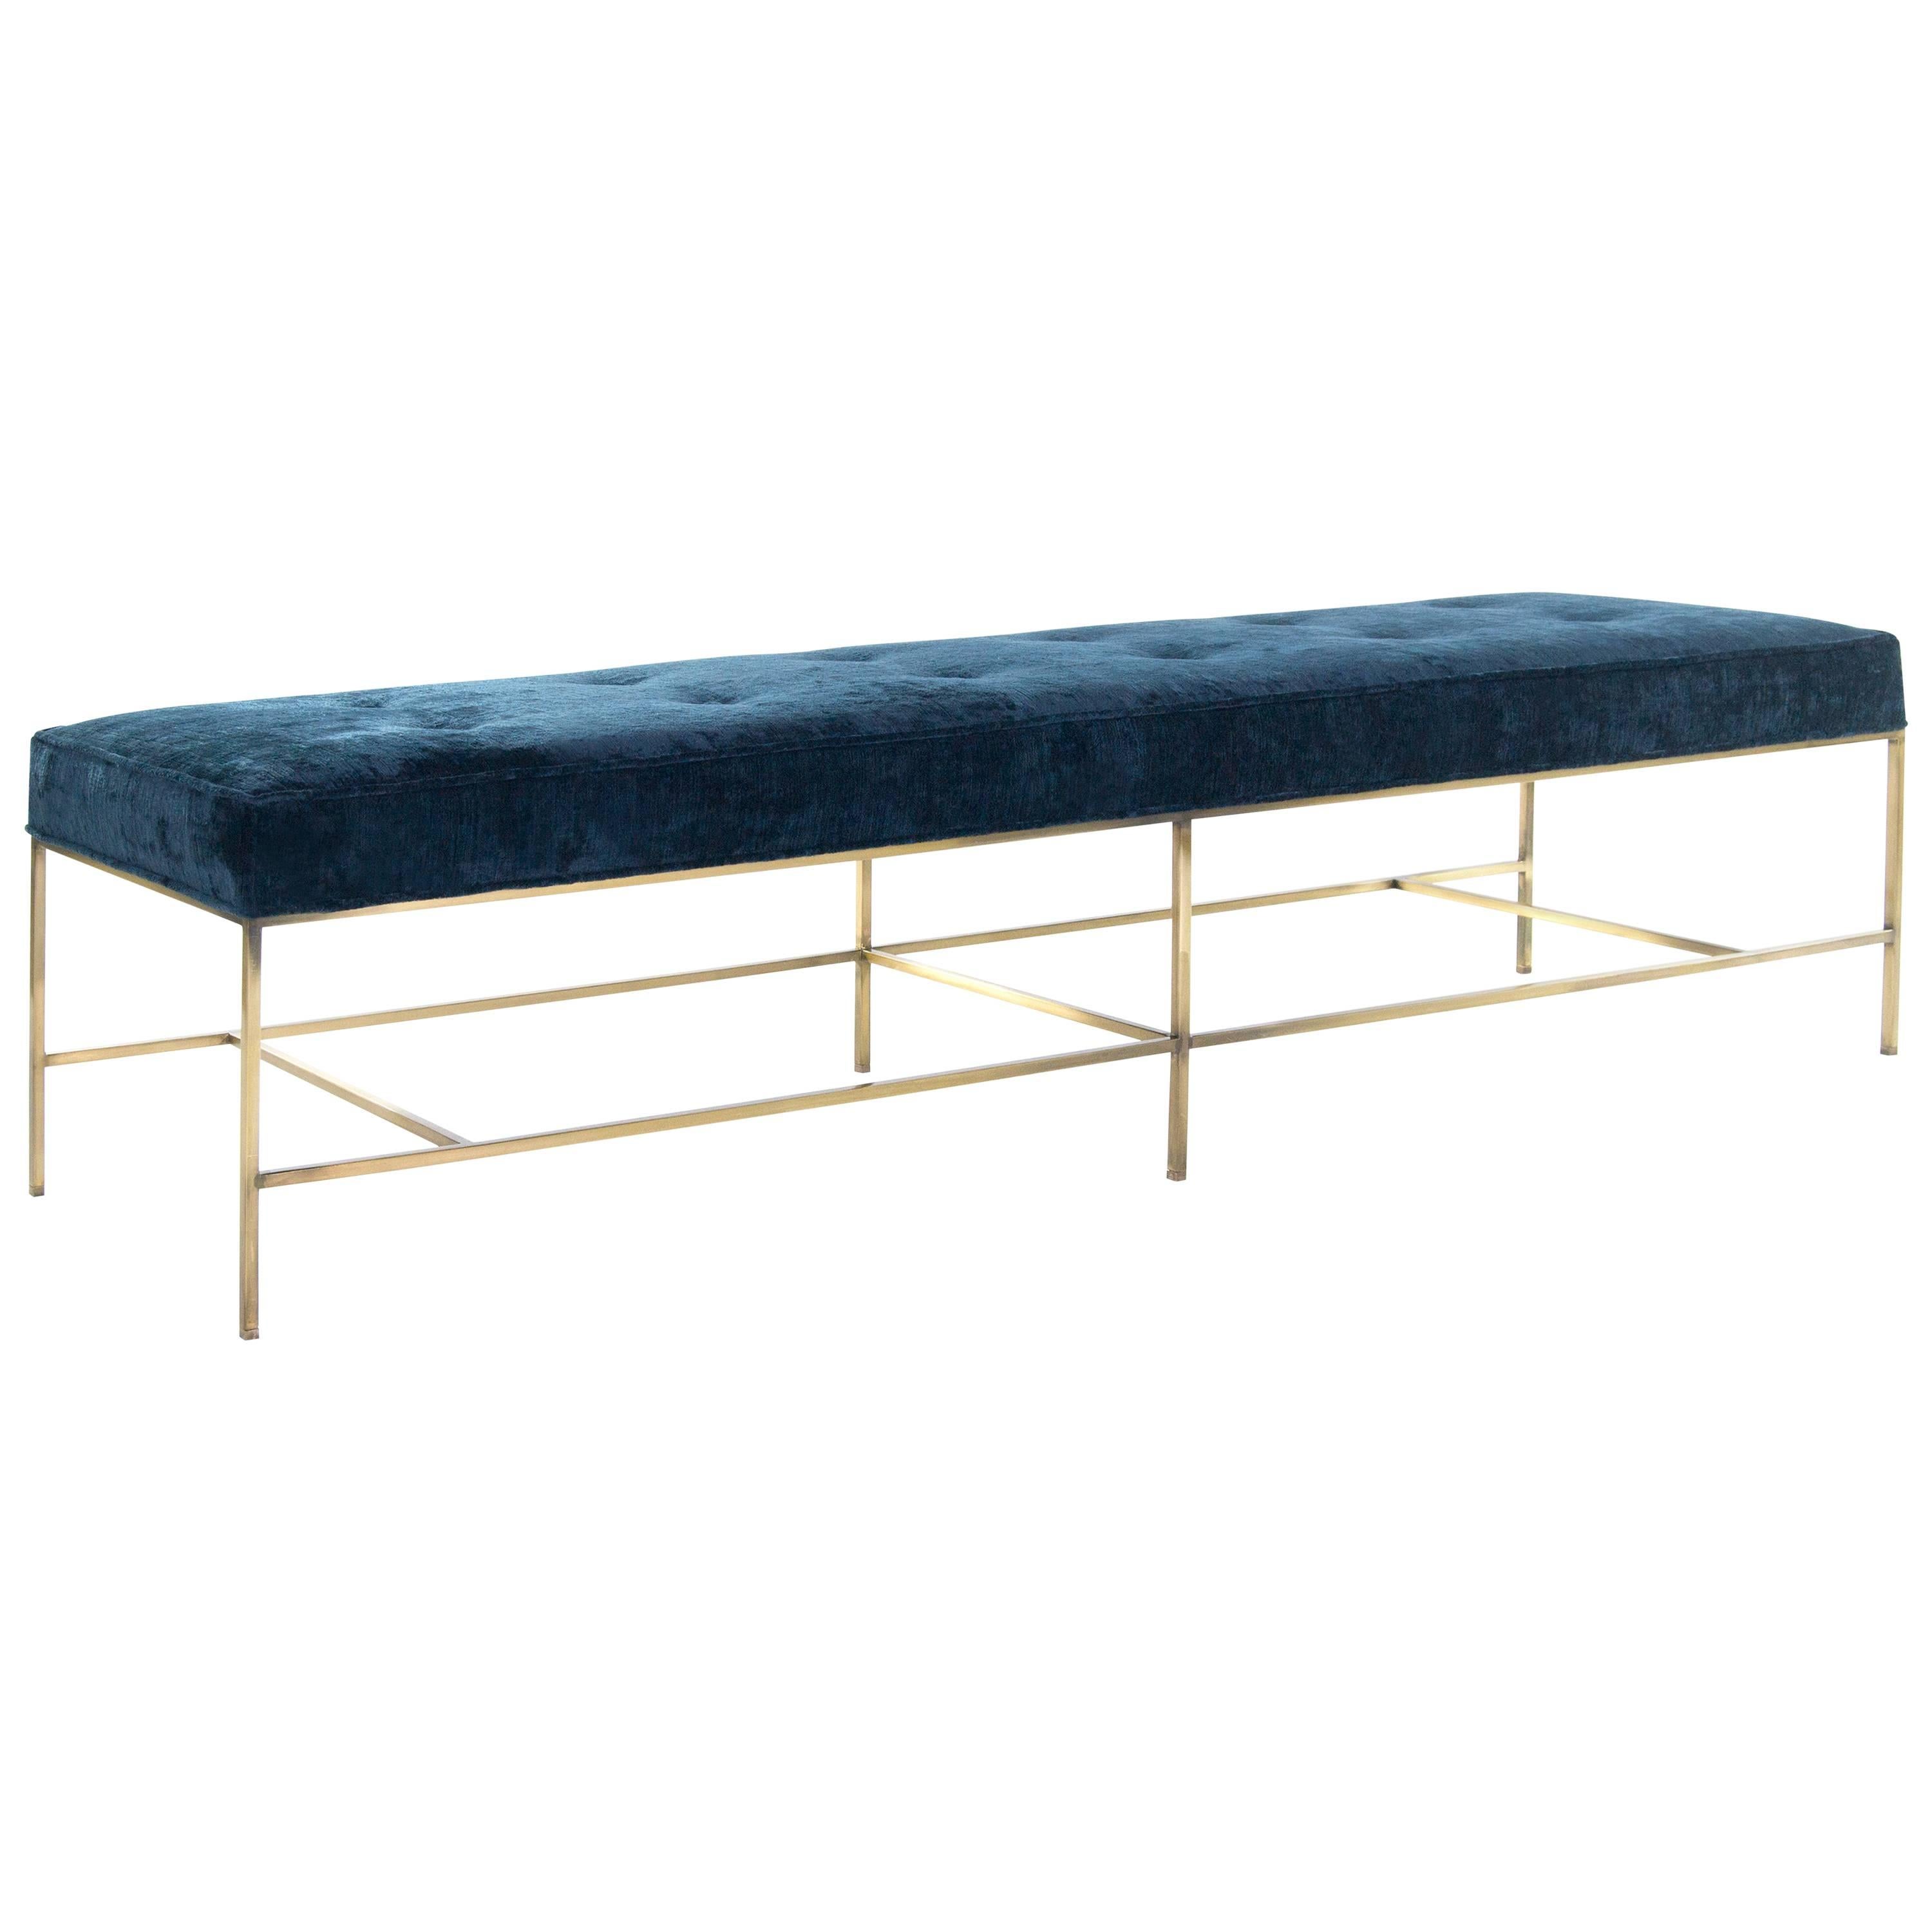 The Architectural Bench by Stamford Modern For Sale